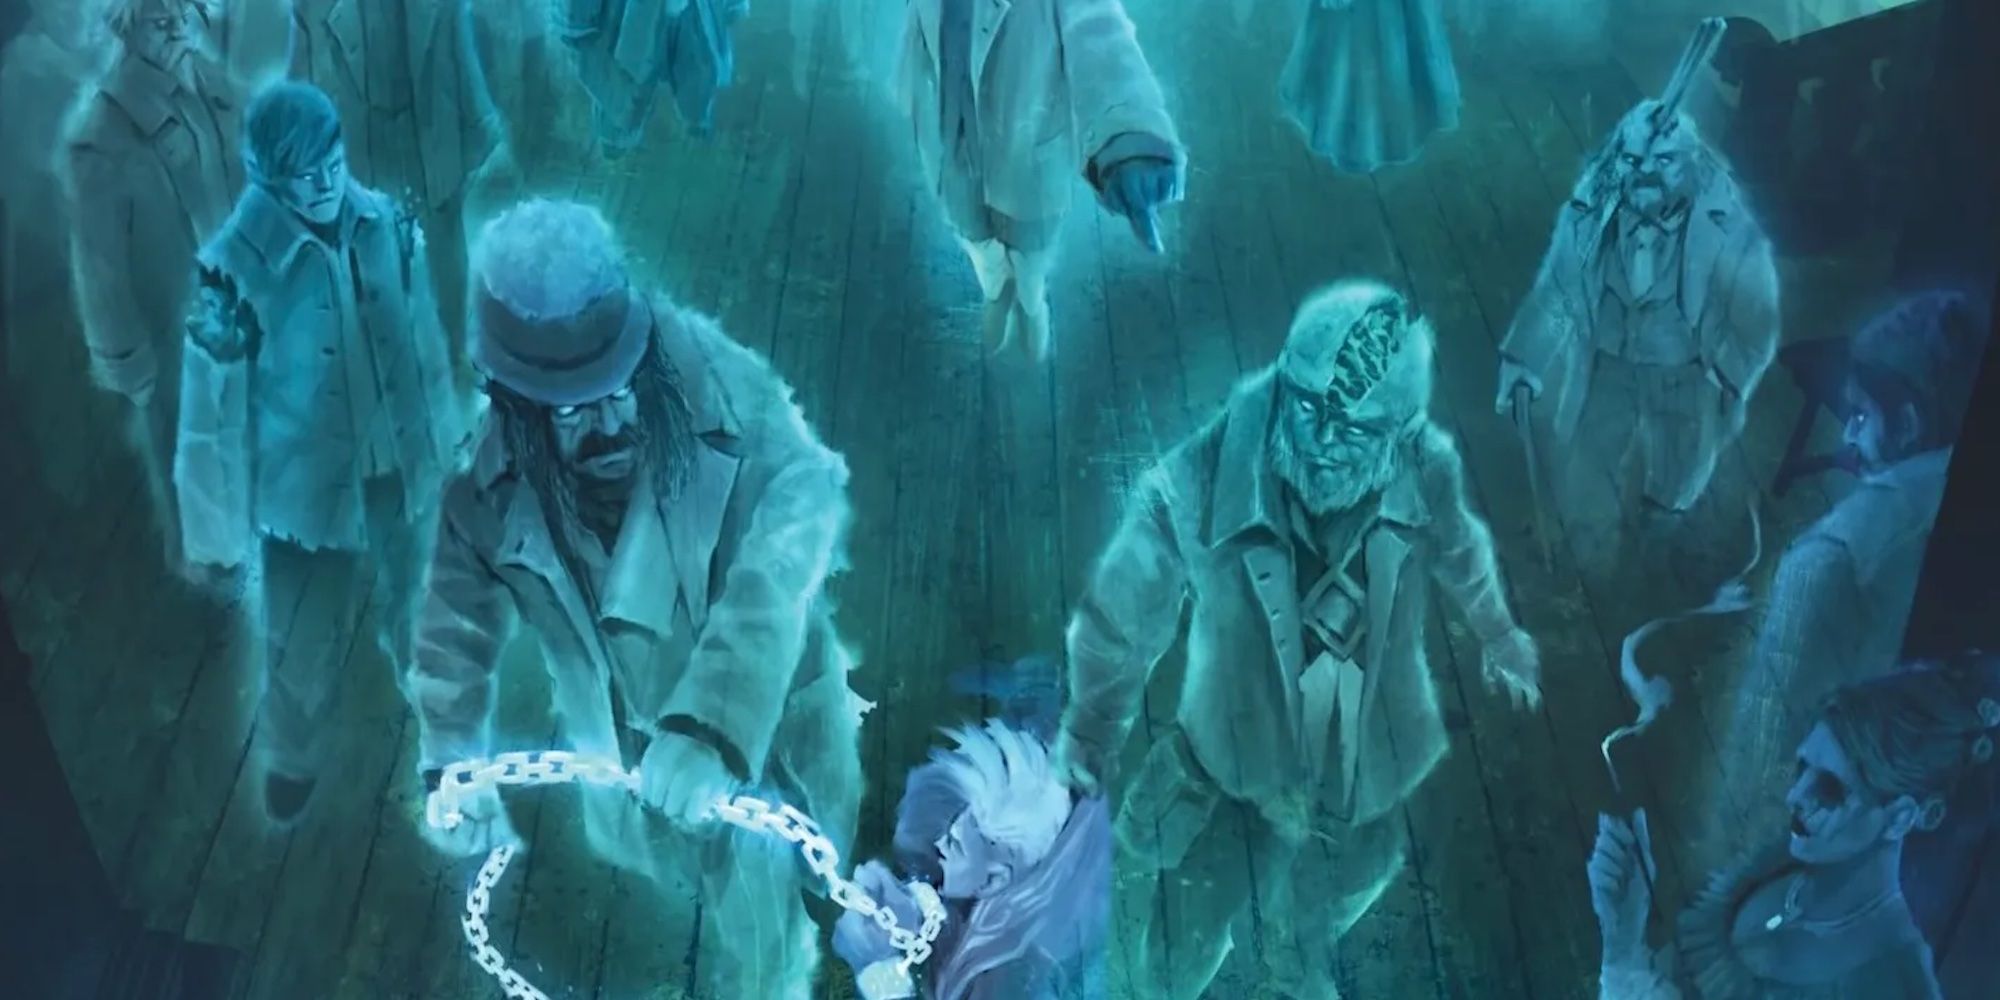 Ghosts stand around a young person, one of which holds them on a chain